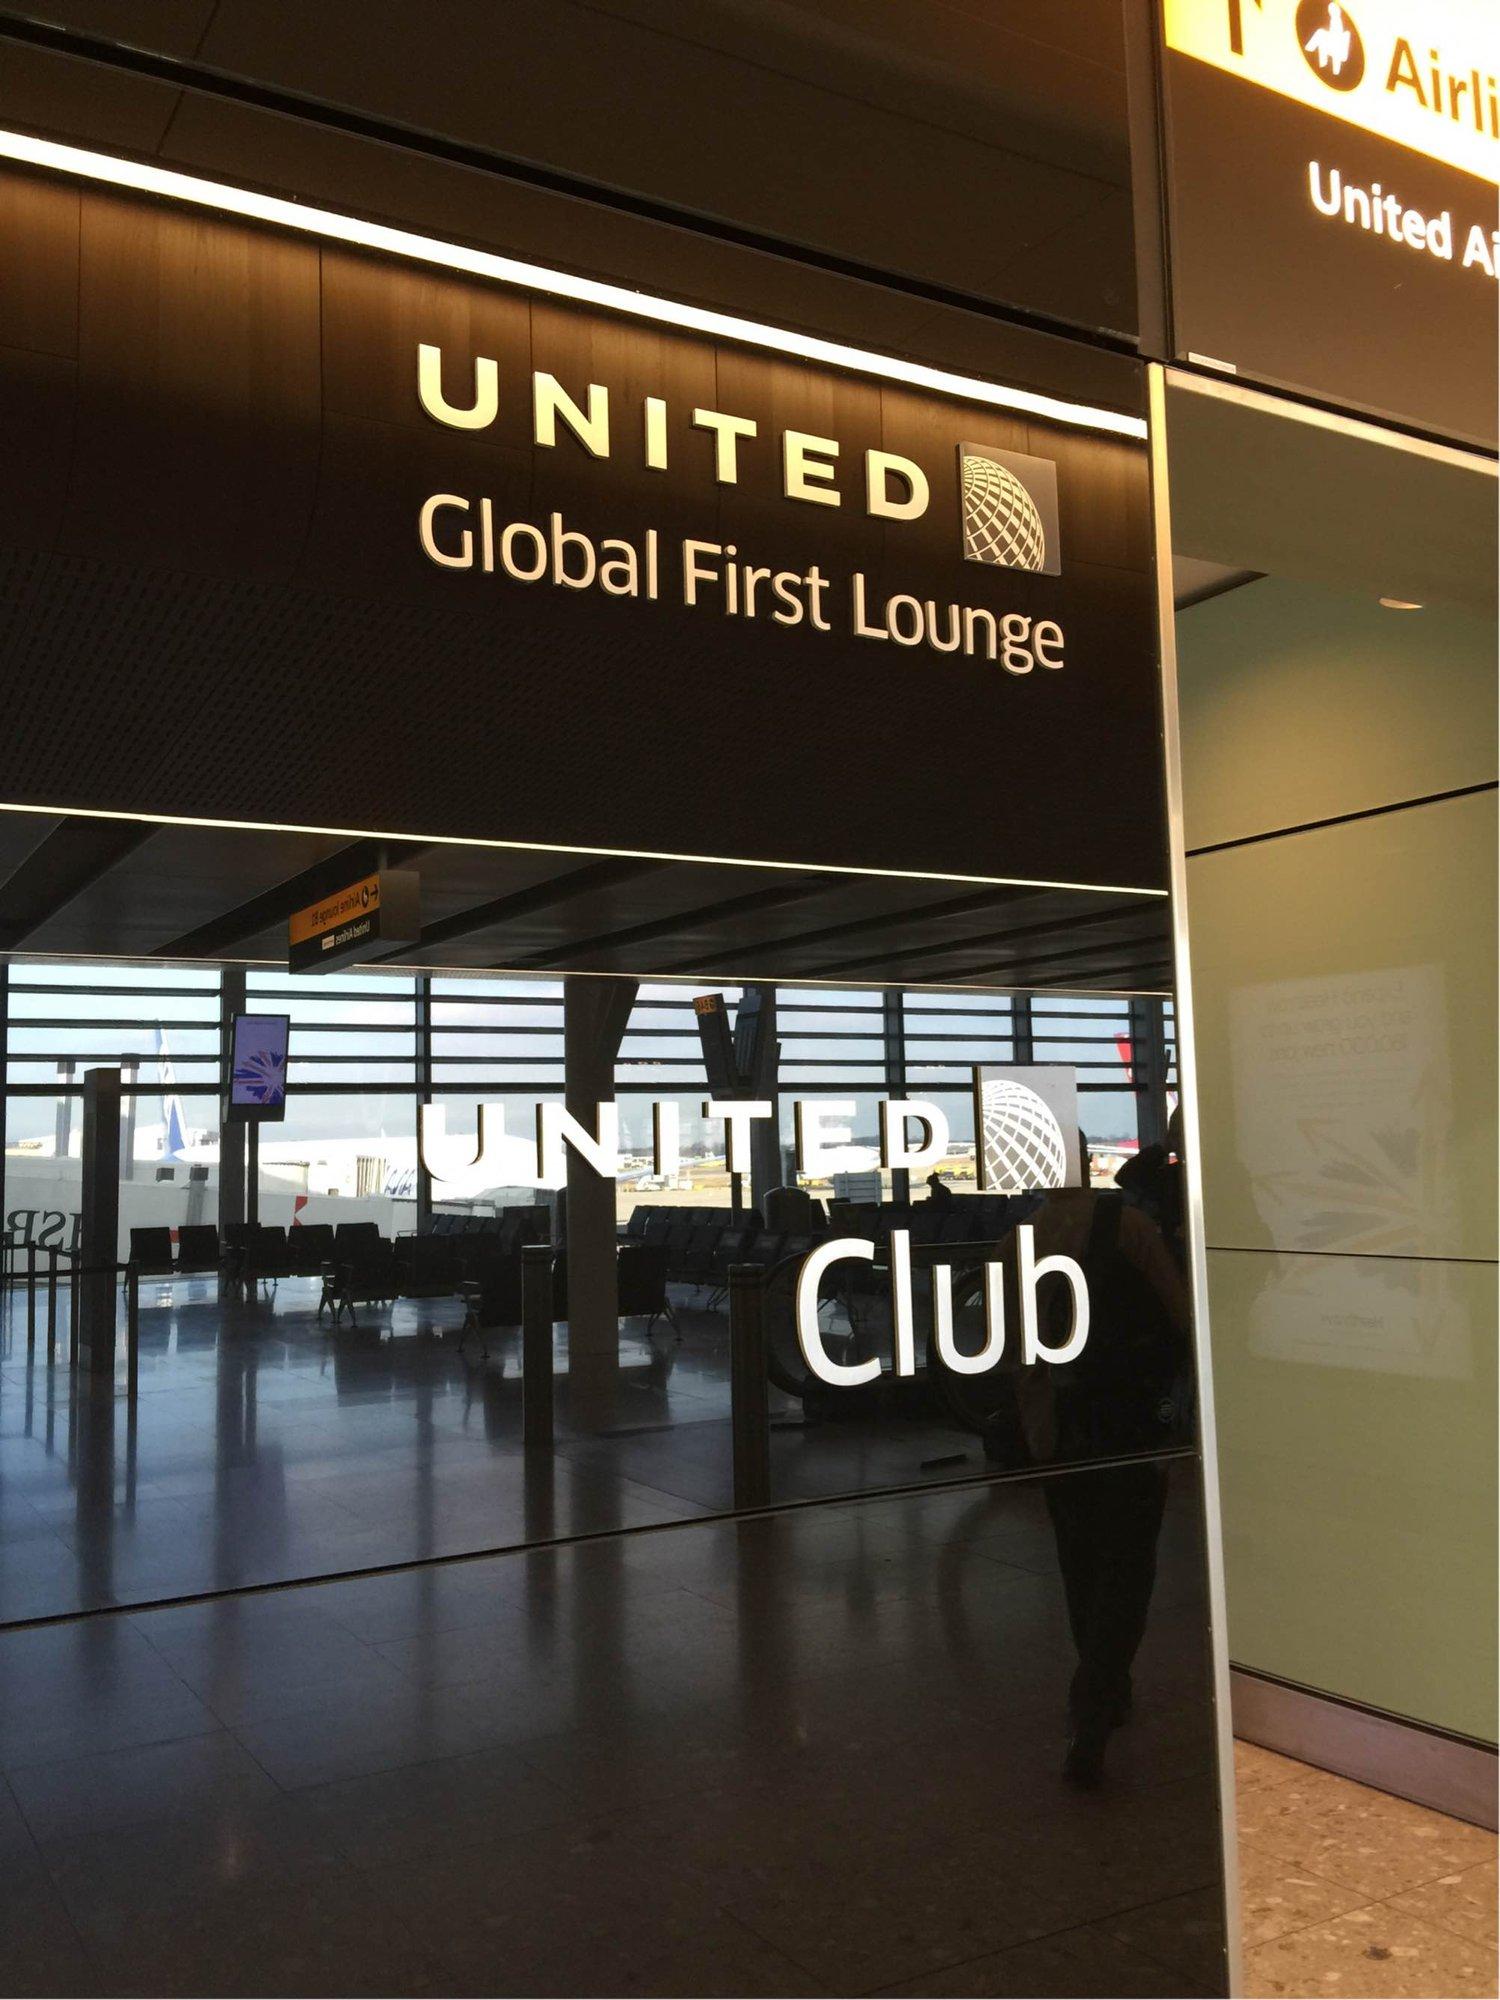 United Global Services Lounge image 16 of 25